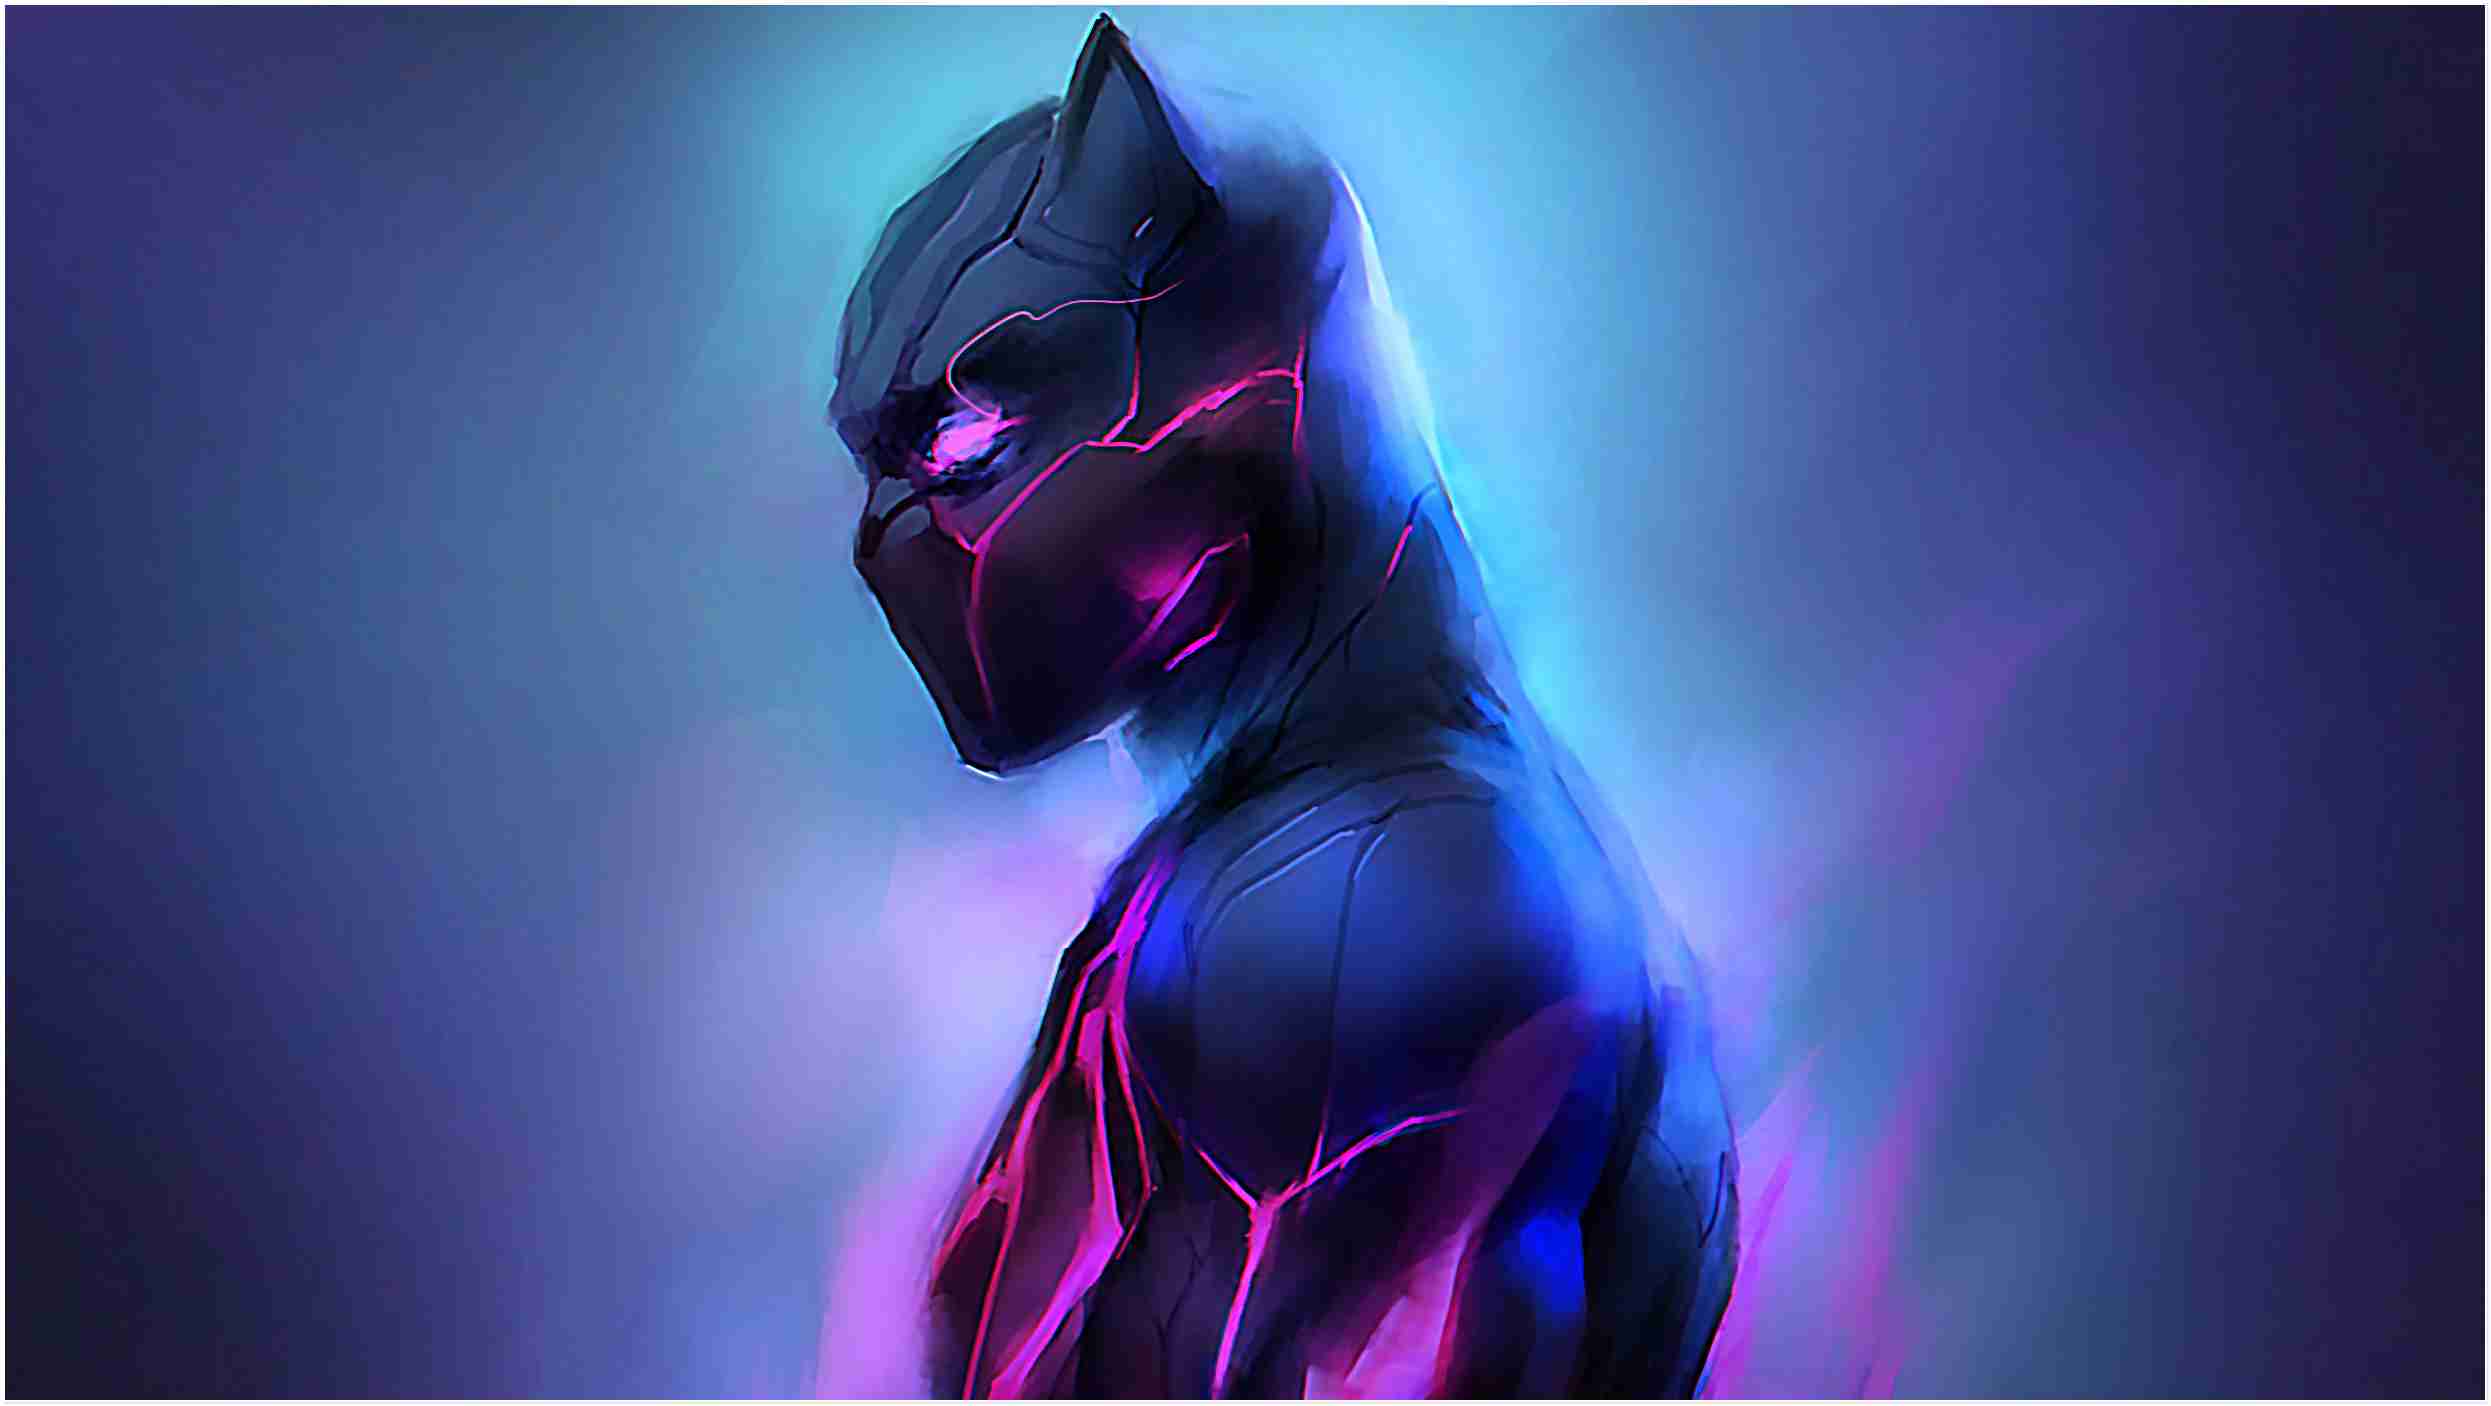 Most popular 14 black panther wallpaper latest Update Wallpaper Wise